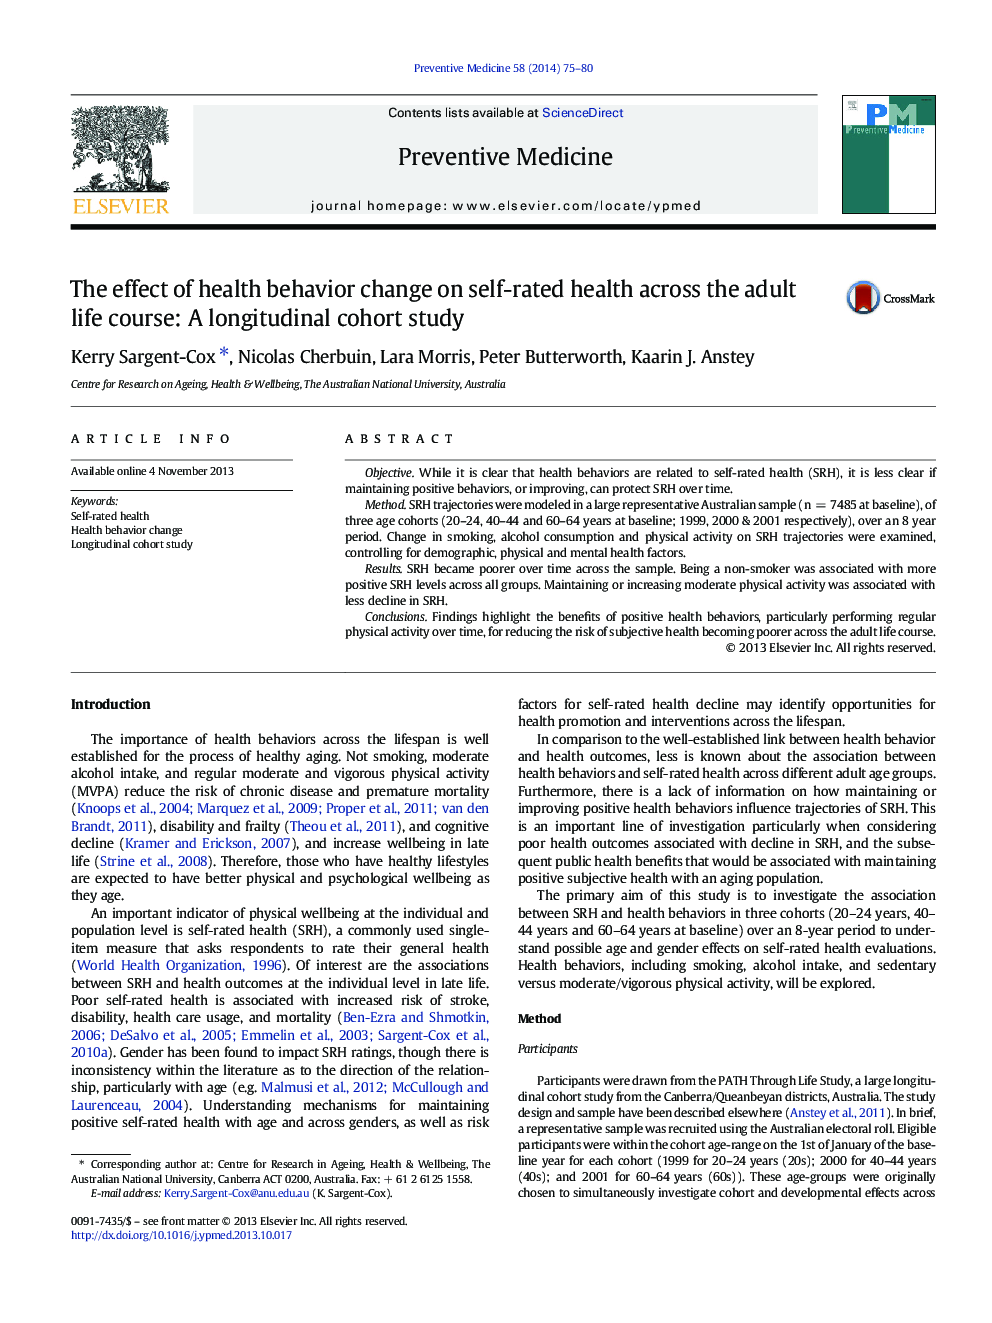 The effect of health behavior change on self-rated health across the adult life course: A longitudinal cohort study